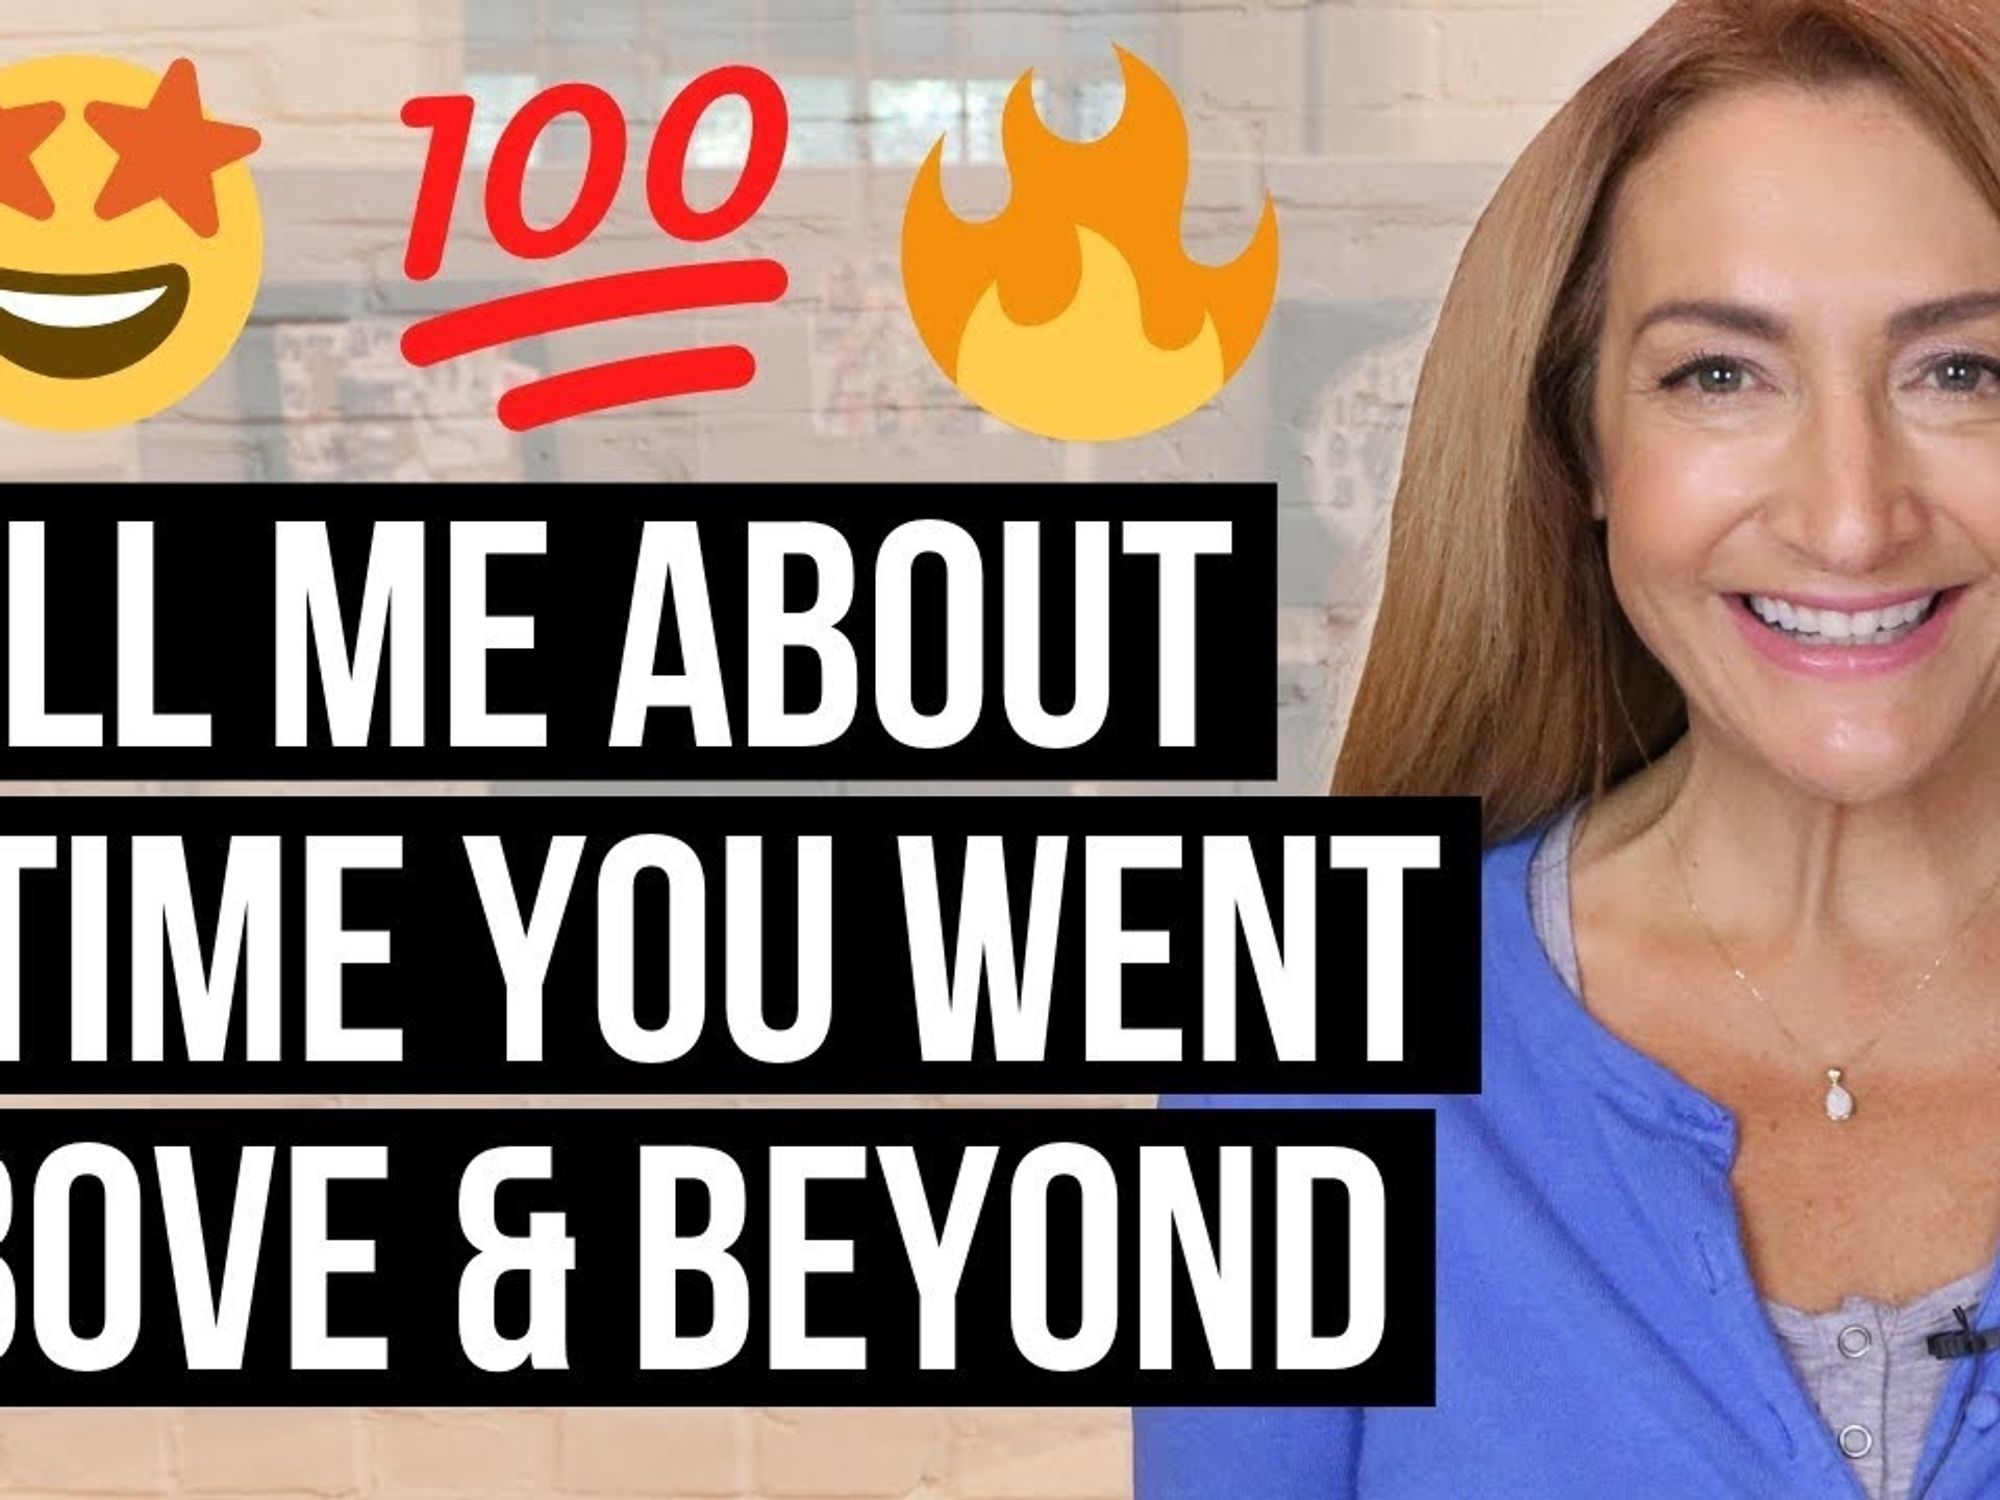 How To Answer "Tell Me About A Time You Went Above & Beyond"